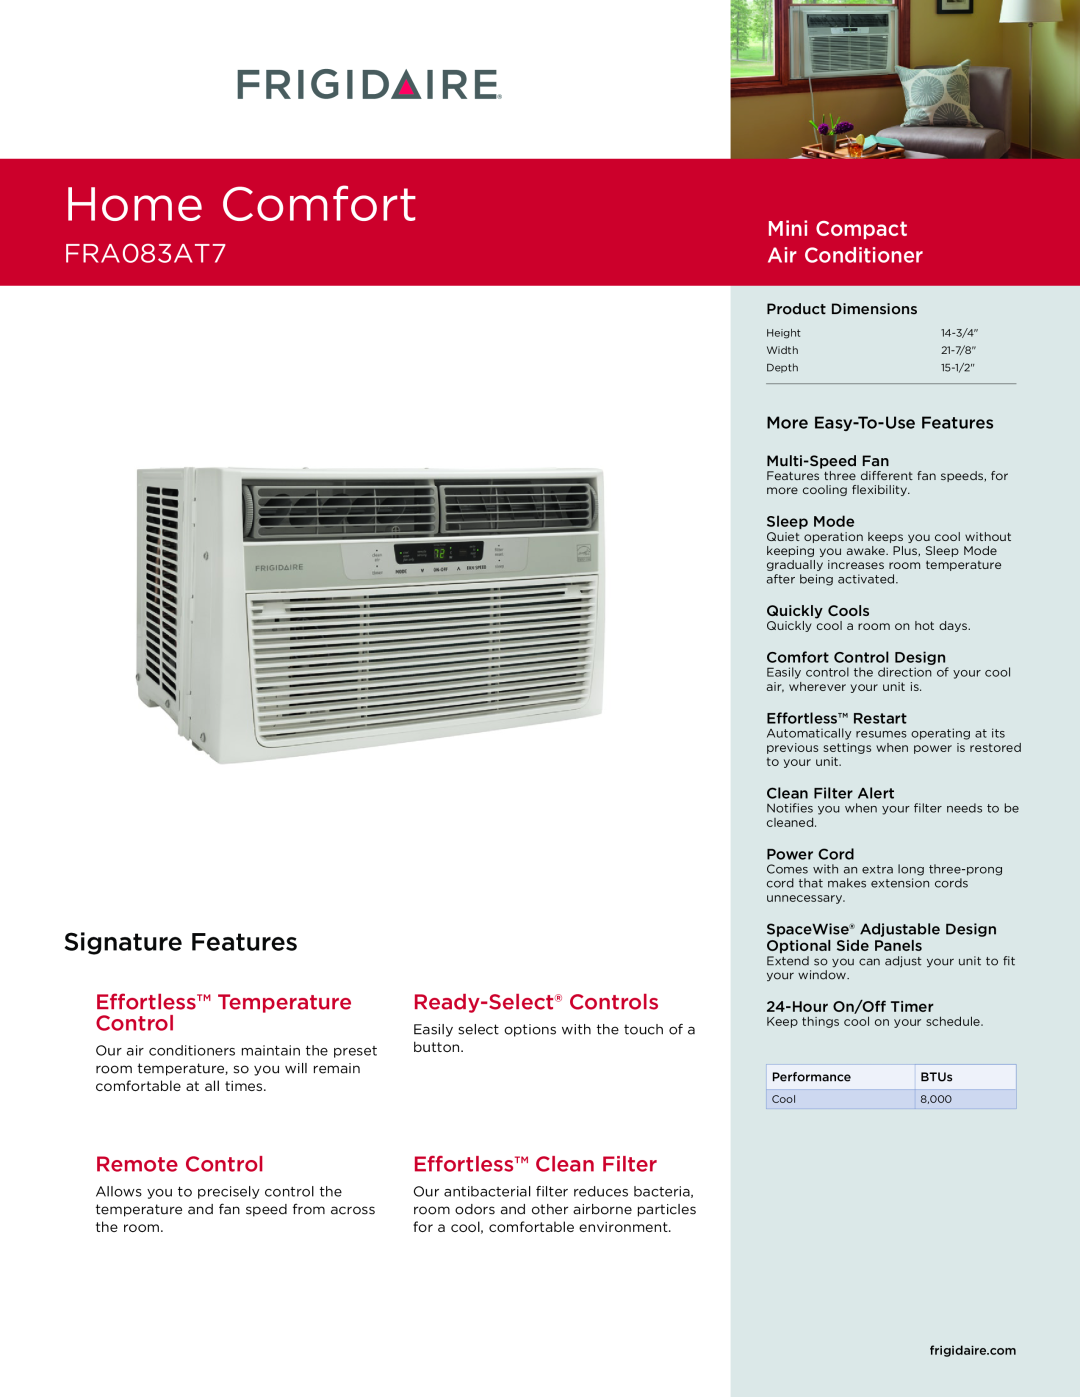 Frigidaire FRA083AT7 dimensions Home Comfort, Signature Features, Mini Compact Air Conditioner , Ready-Select Controls 